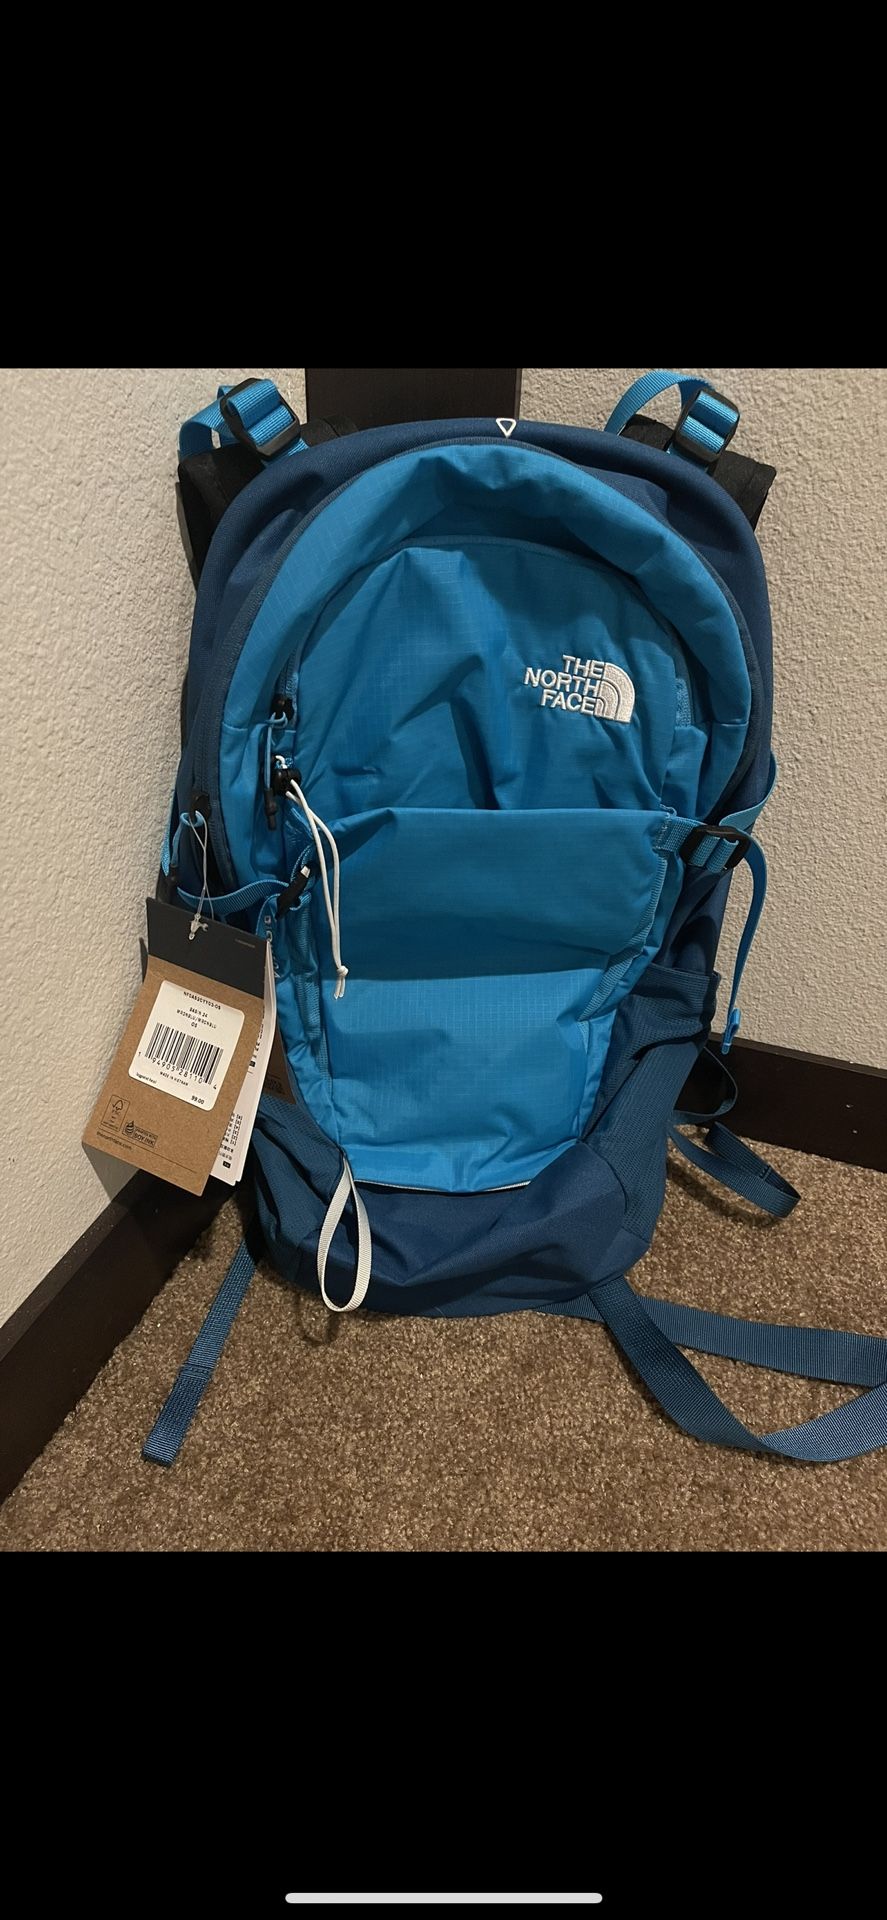 BRAND NEW NORTH FACE BACKPACK 